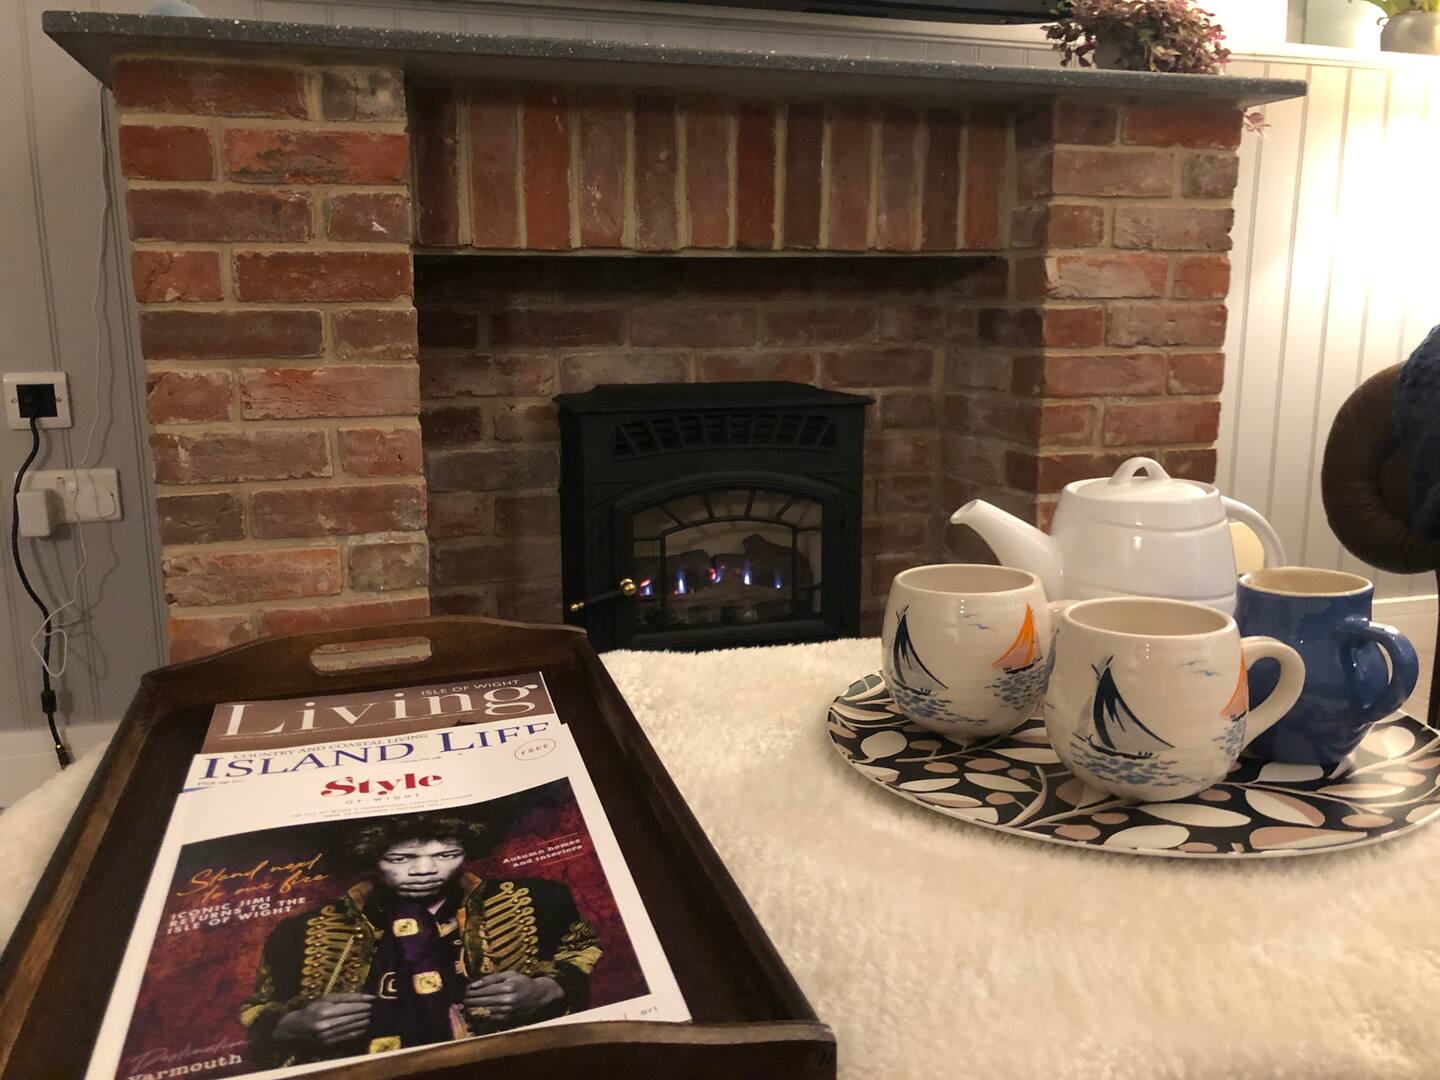 Take tea and snuggle in front of the fire.